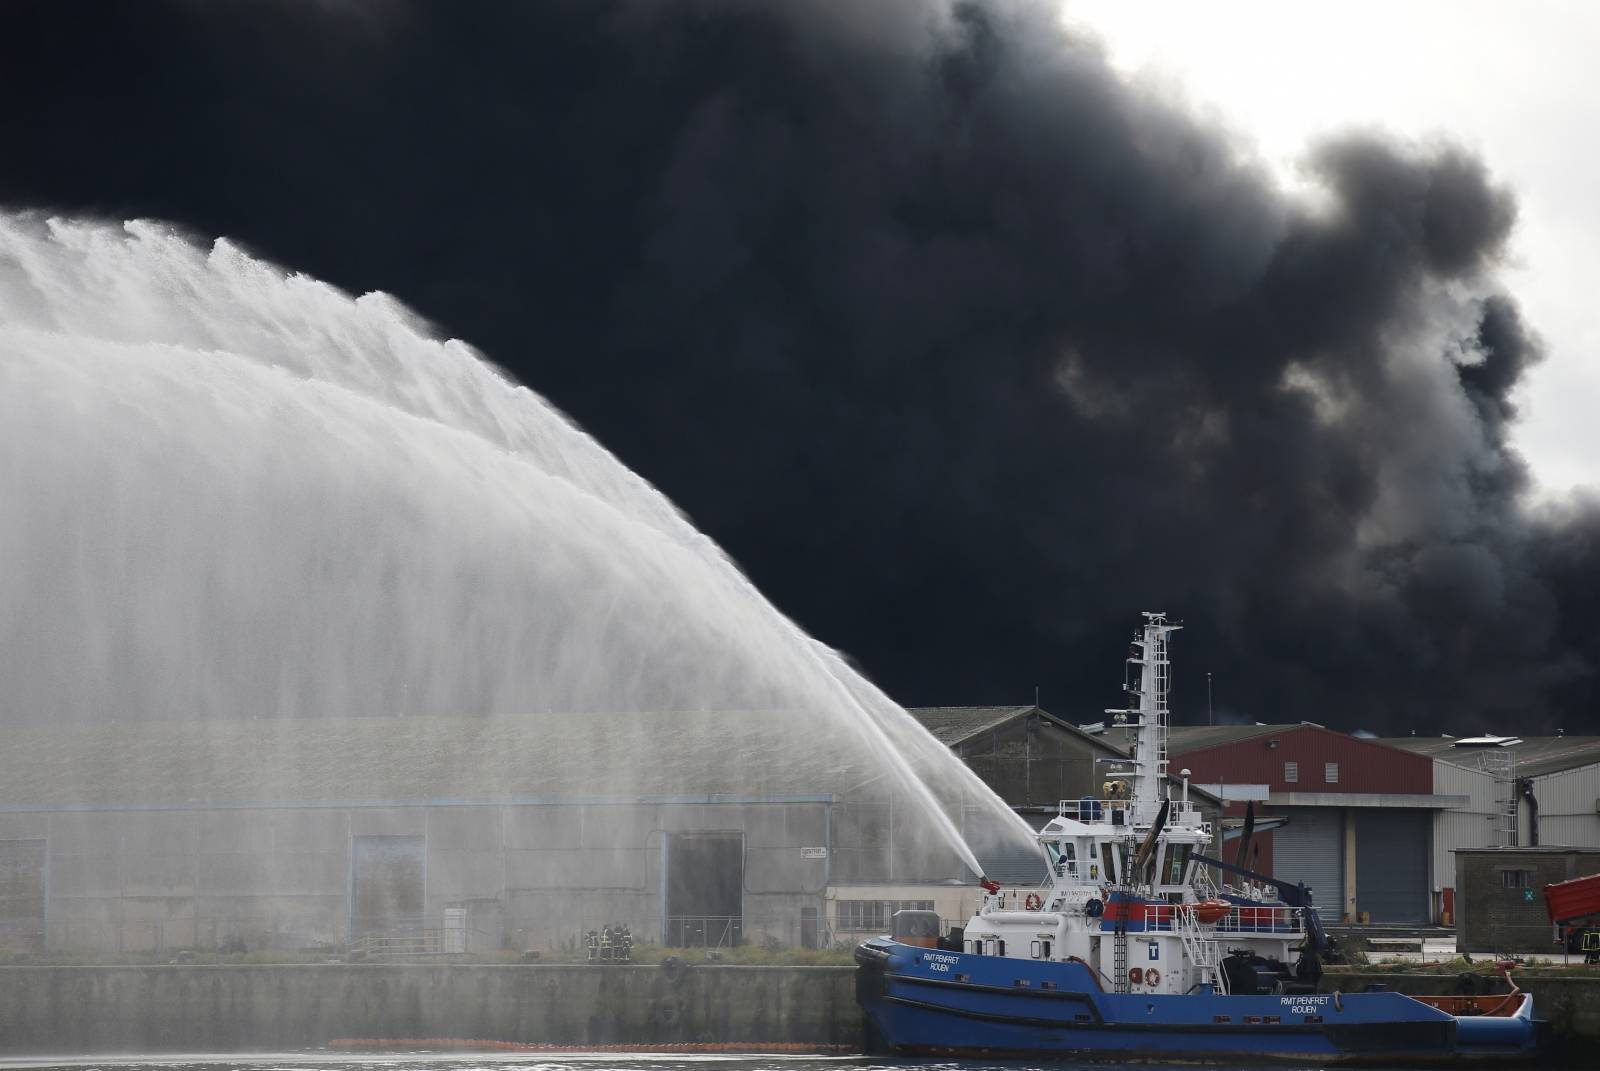 Firefighting vessel sprays water after a large fire broke out at the factory of Lubrizol in Rouen